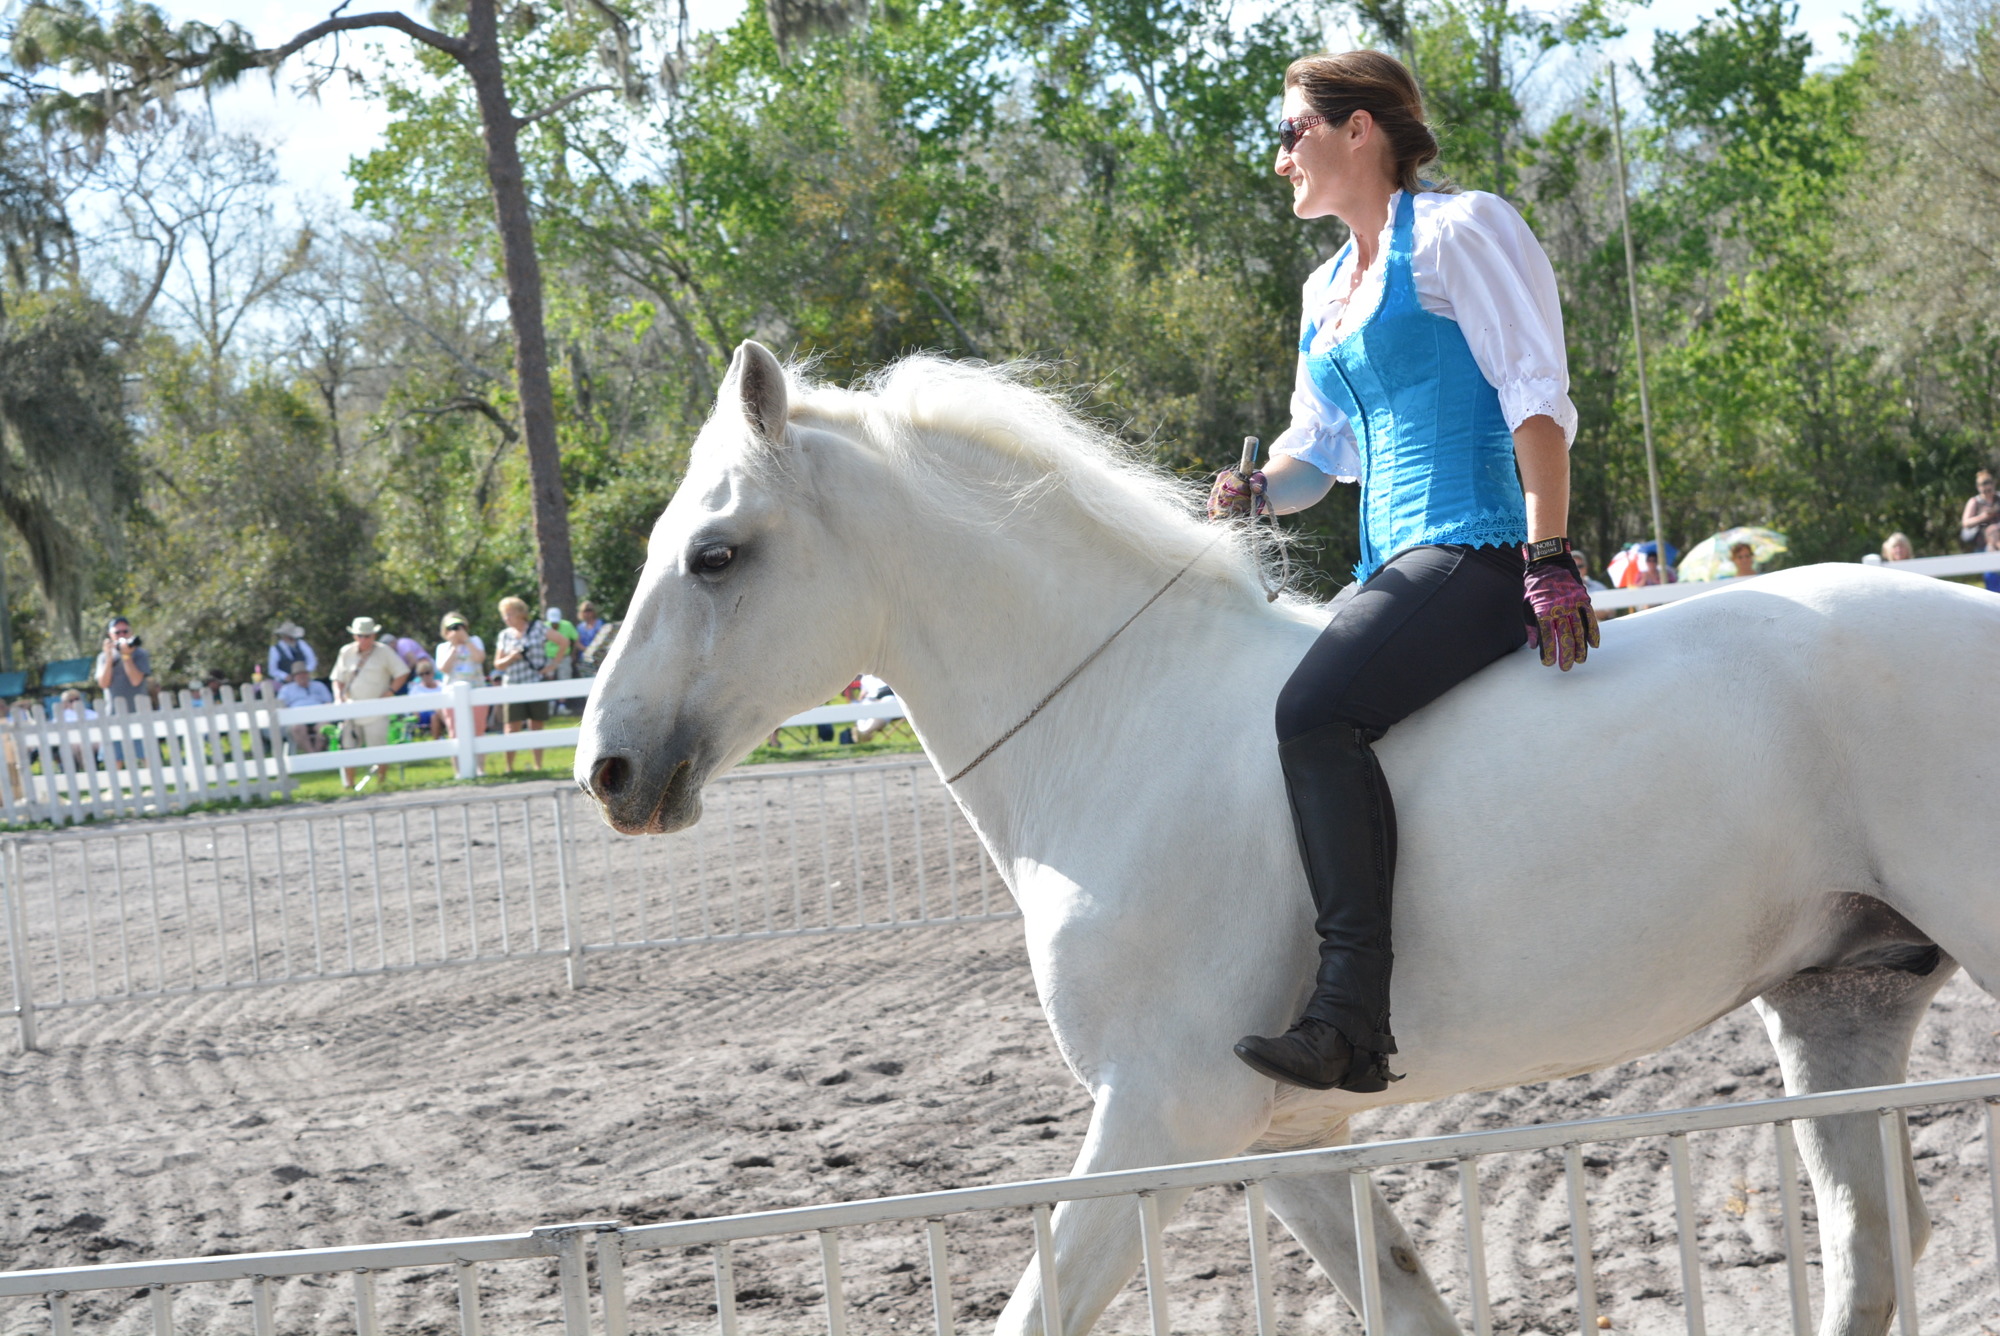 Herrmann's Royal Lipizzan Stallions trainer Rebecca McCullough rides Argentos for a Thursday afternoon equestrian demonstration.